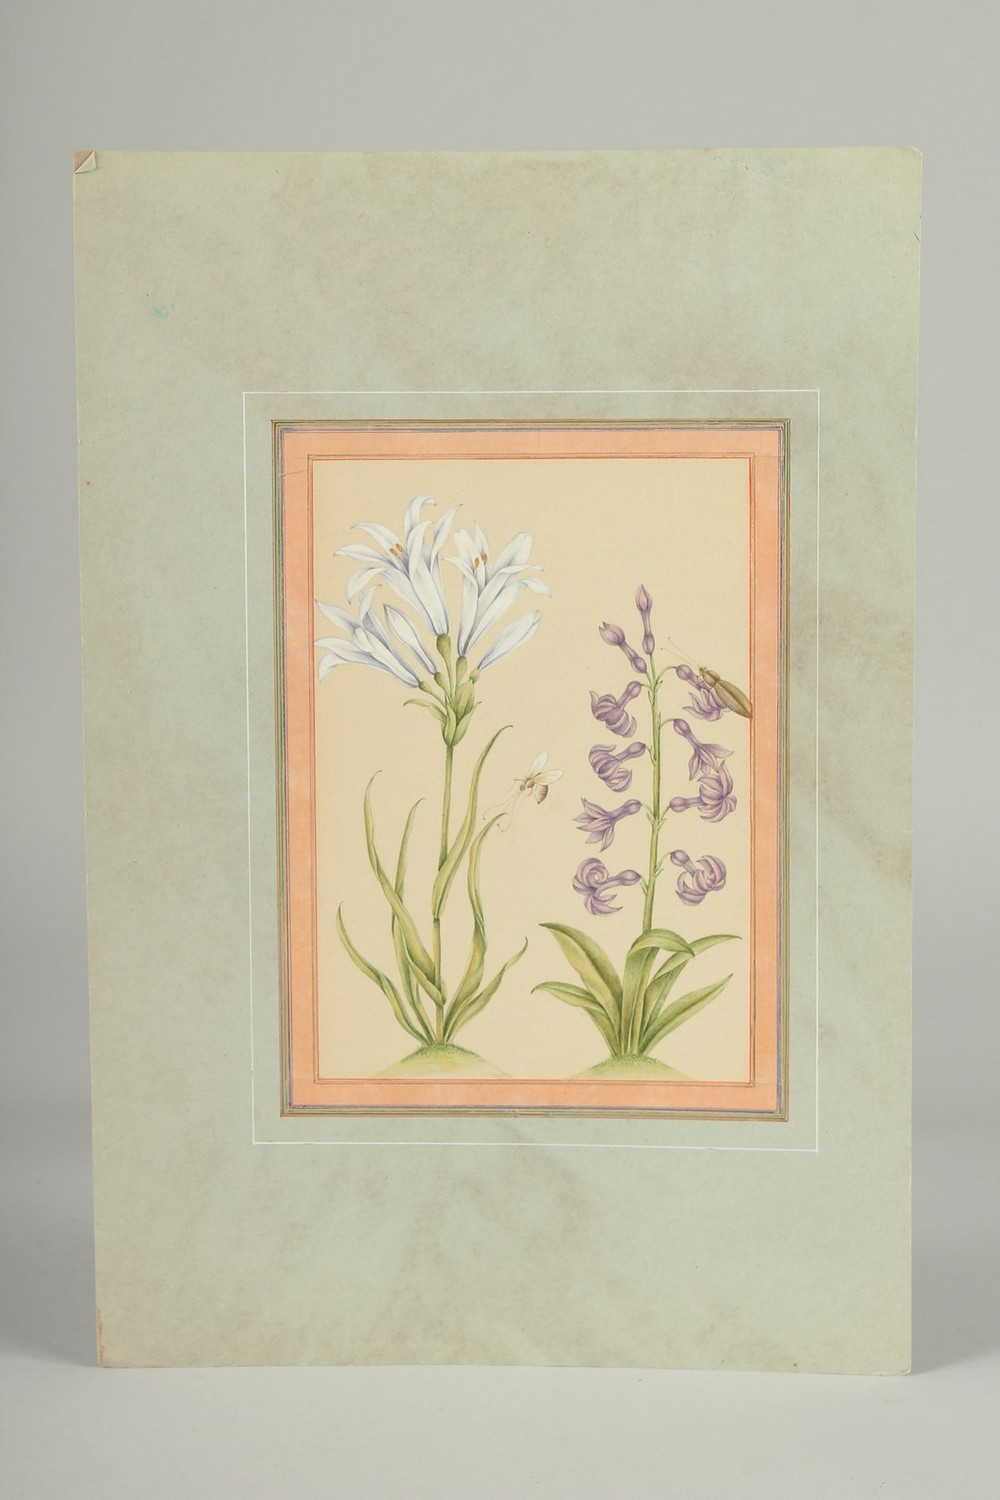 A FINE PERSIAN QAJAR PAINTING OF FLOWERS, image 18cm x 12.5cm.